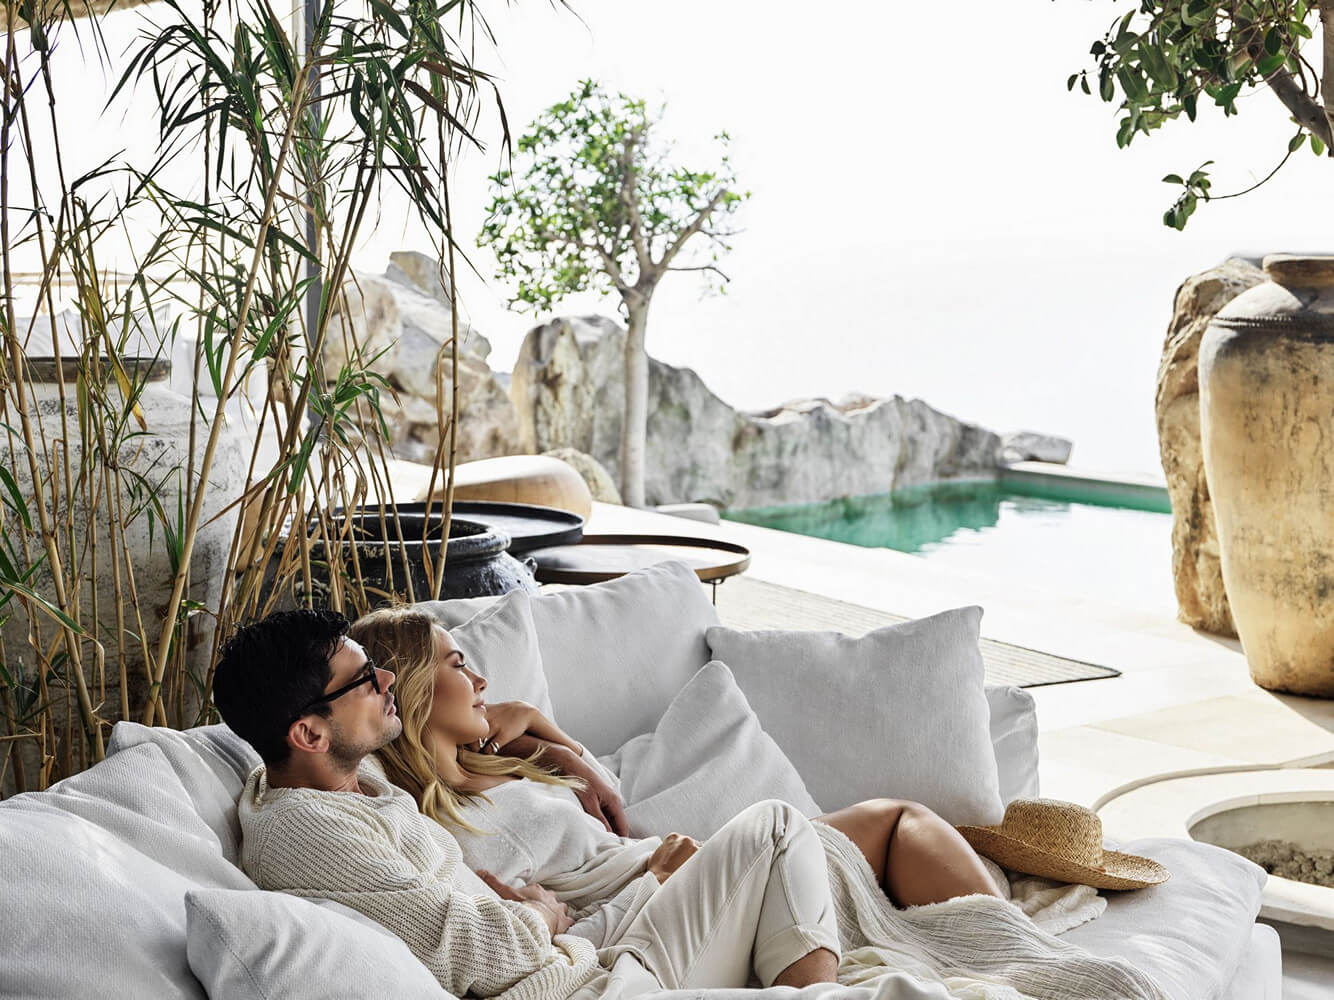 Couple enjoying their day in a private villa in Greece